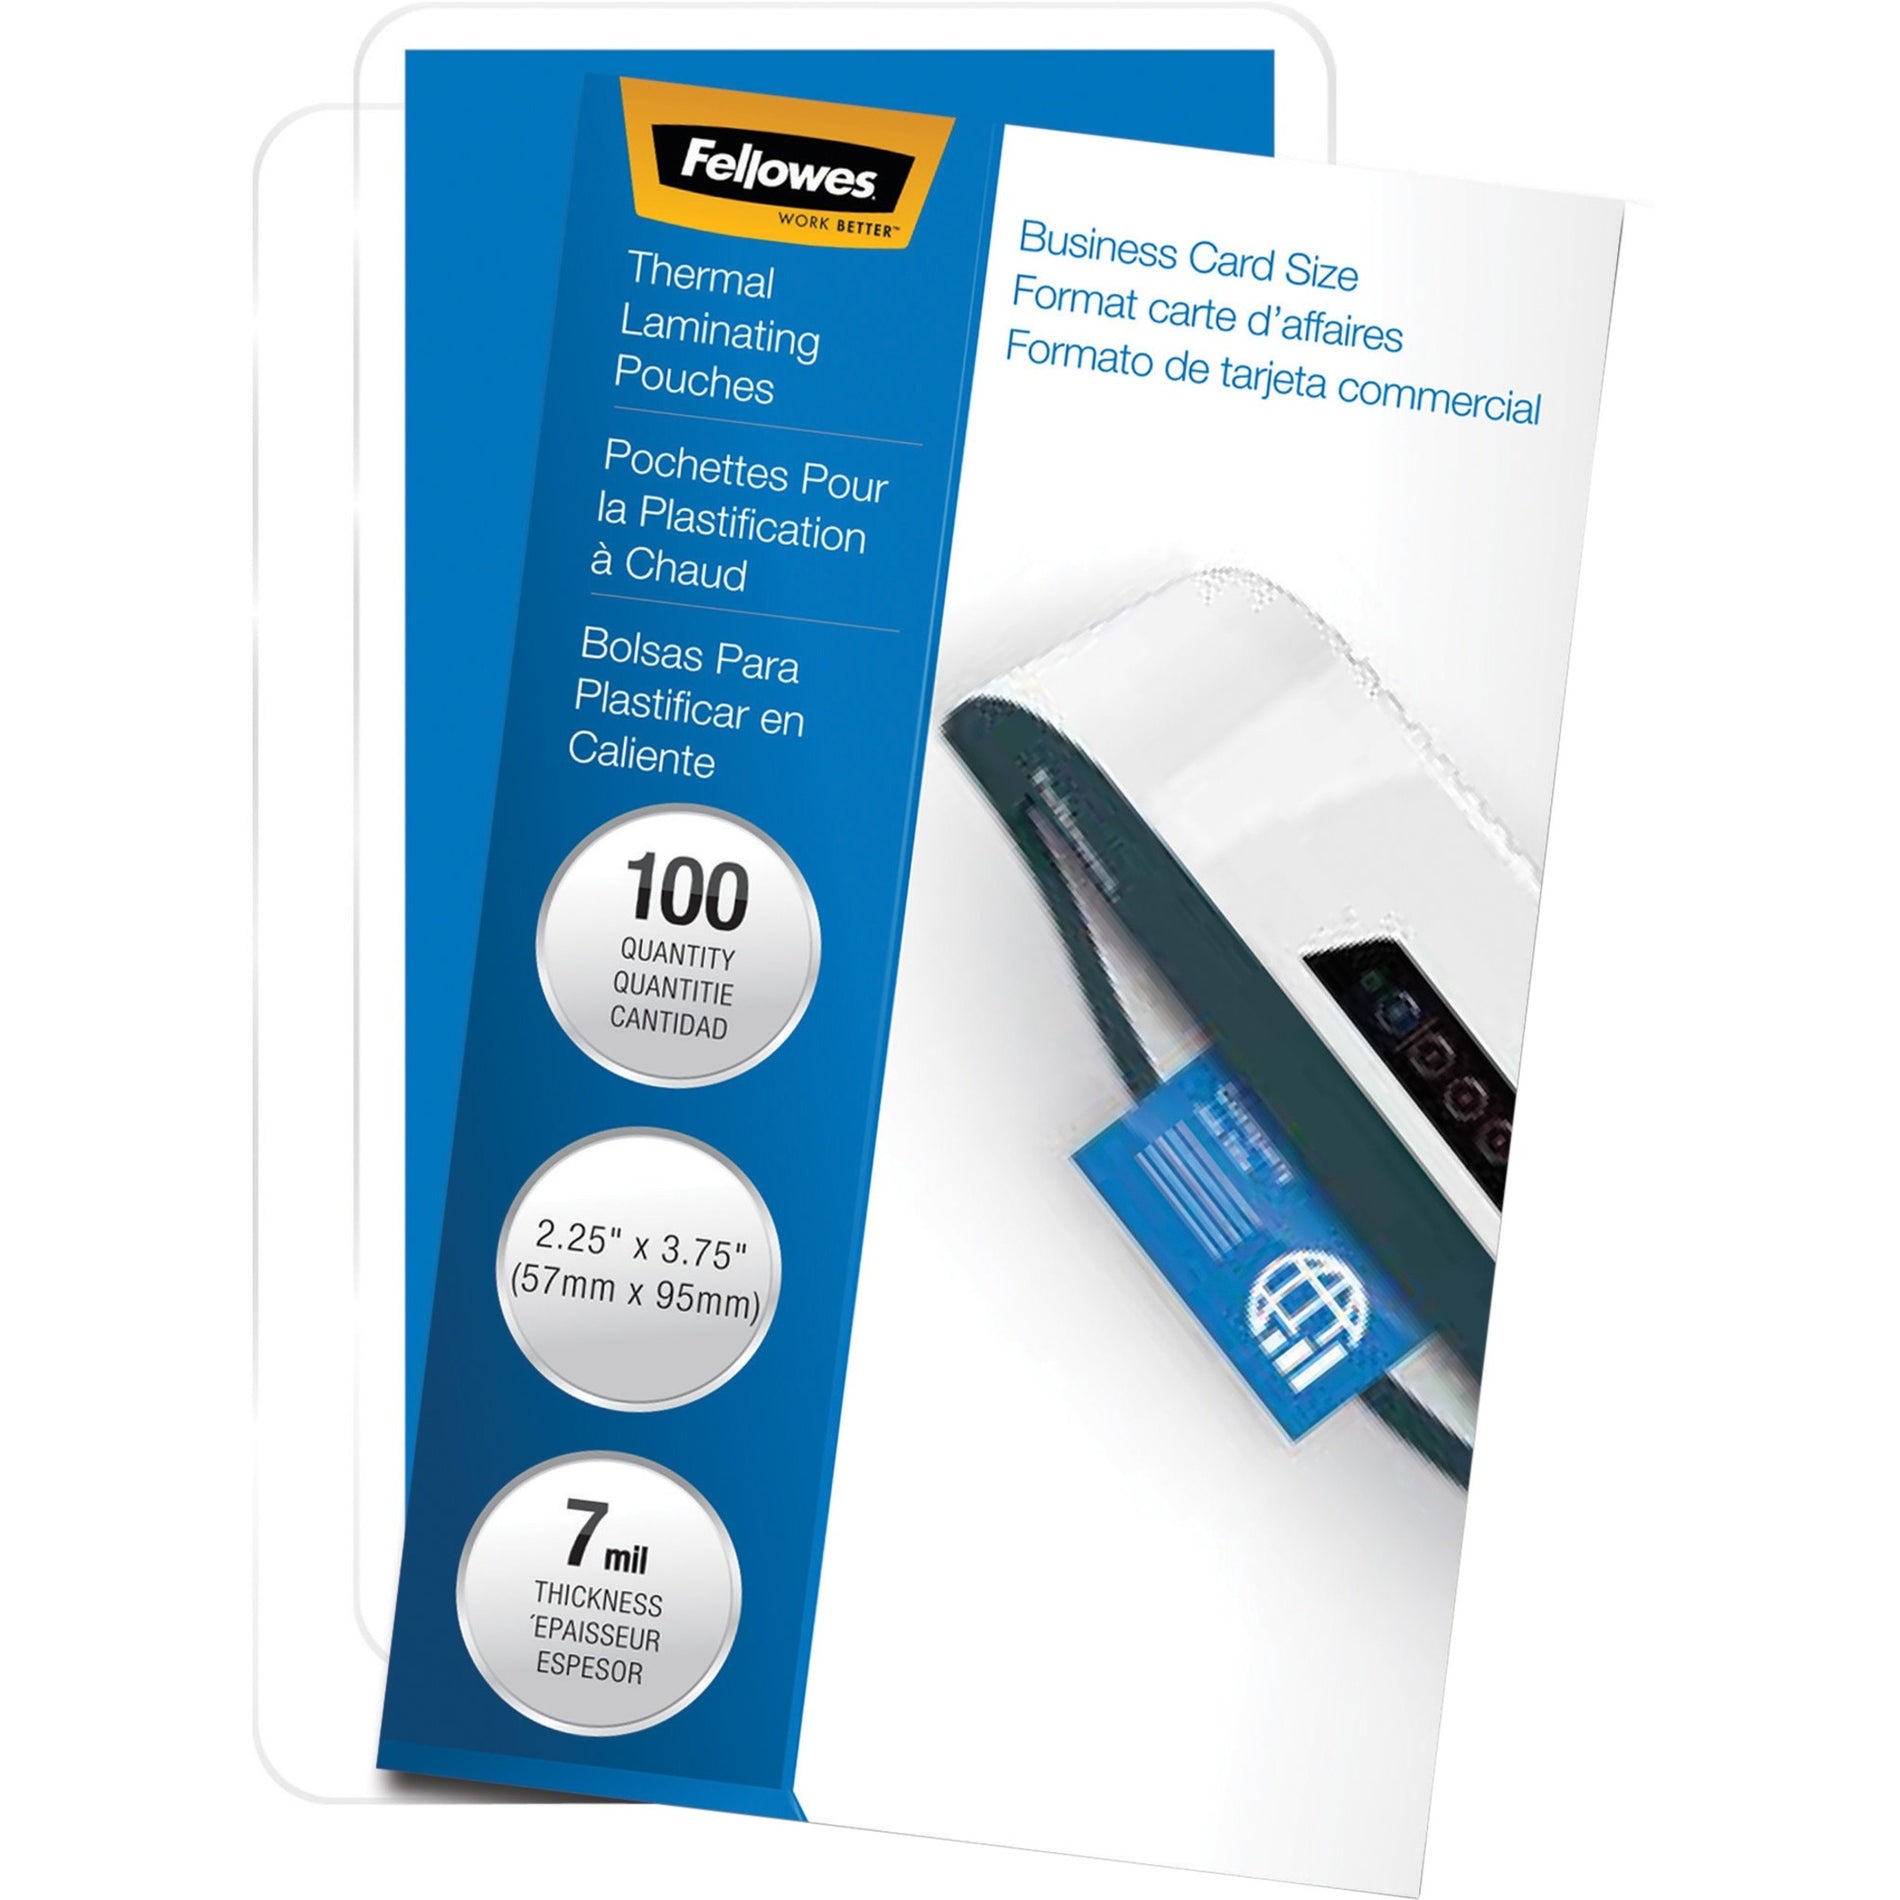 Fellowes 52059 Business Card Glossy Laminating Pouches, Durable, Clear, 7 mil Thickness, 100/Pack